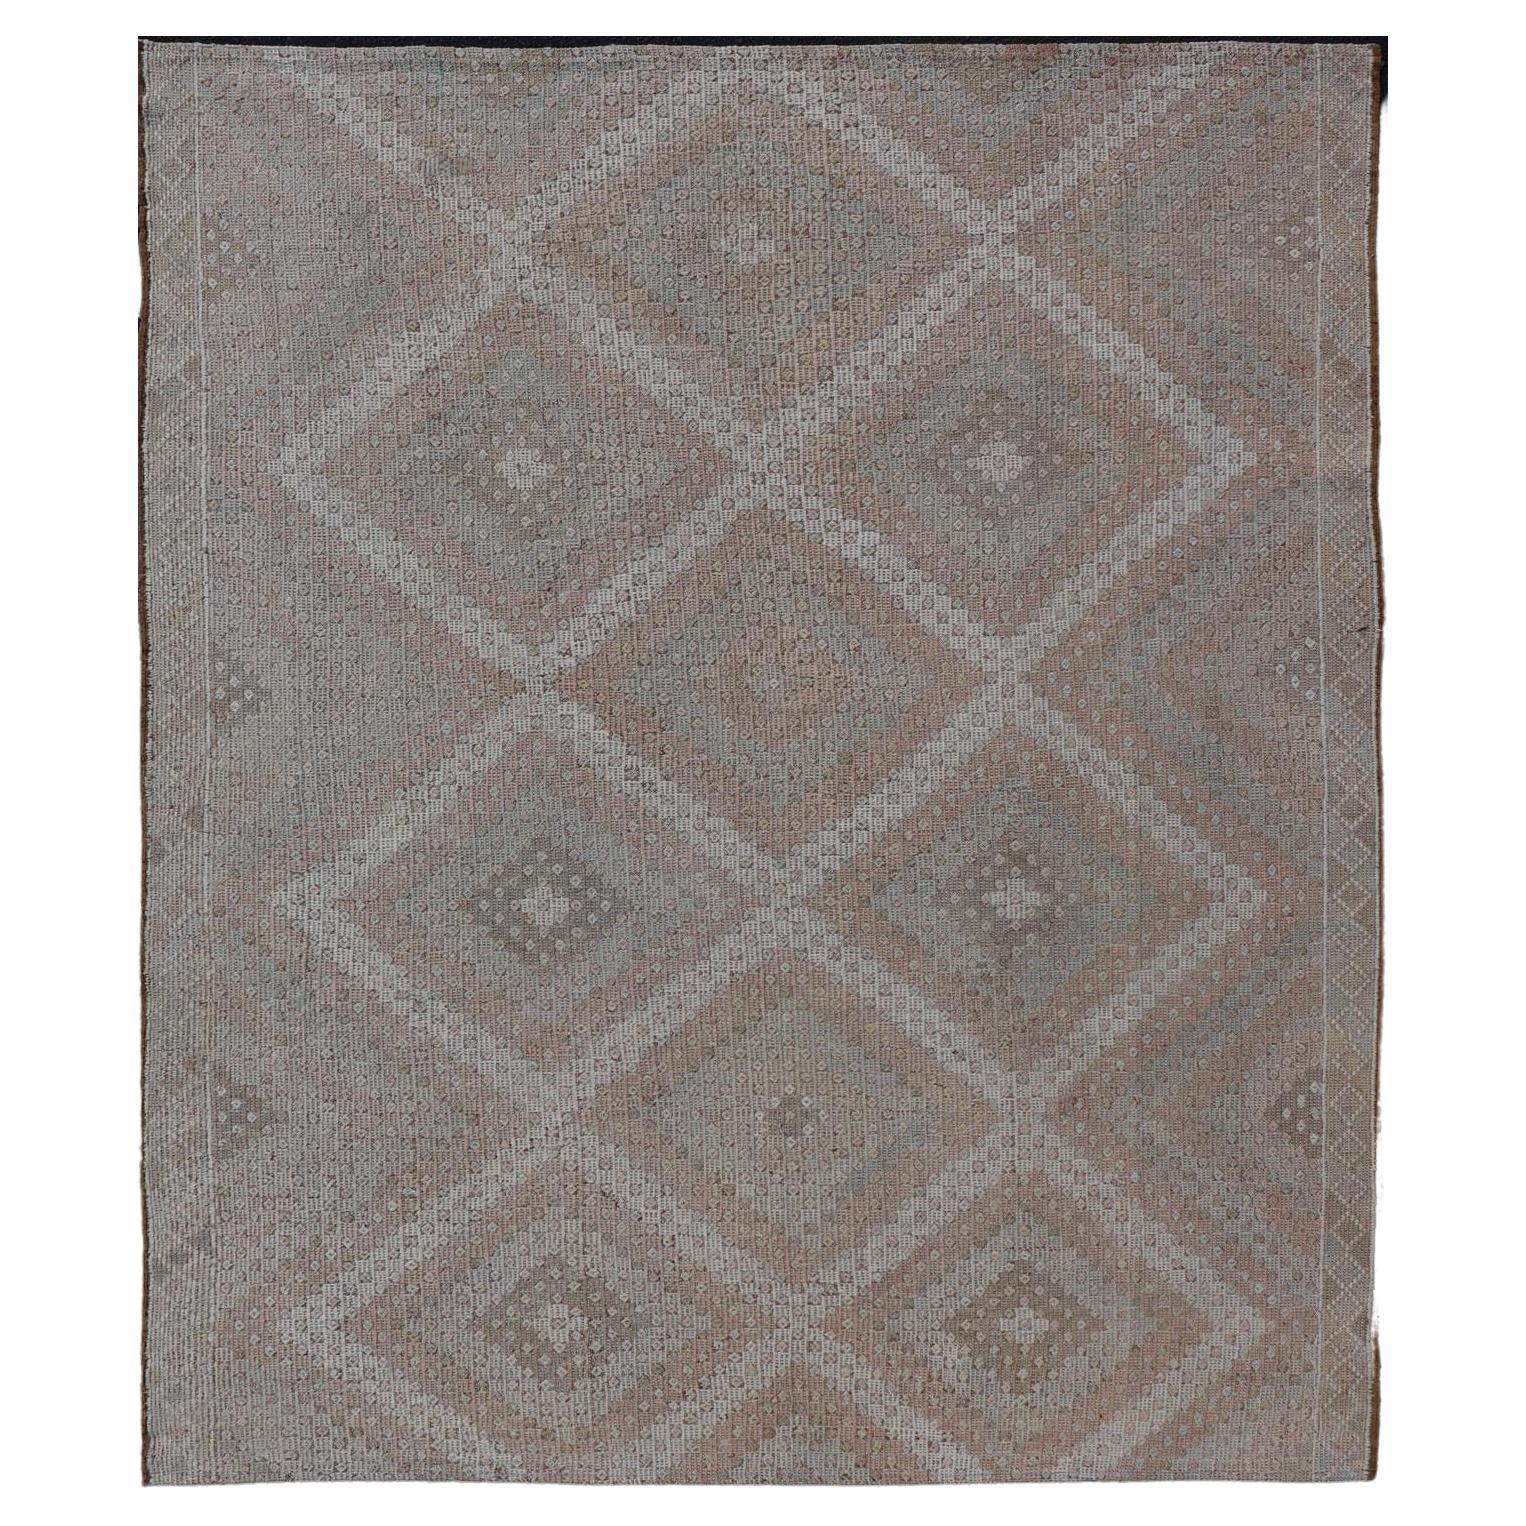 Vintage Turkish Embroidered Rug with Geometric Diamond Design with Soft Colors